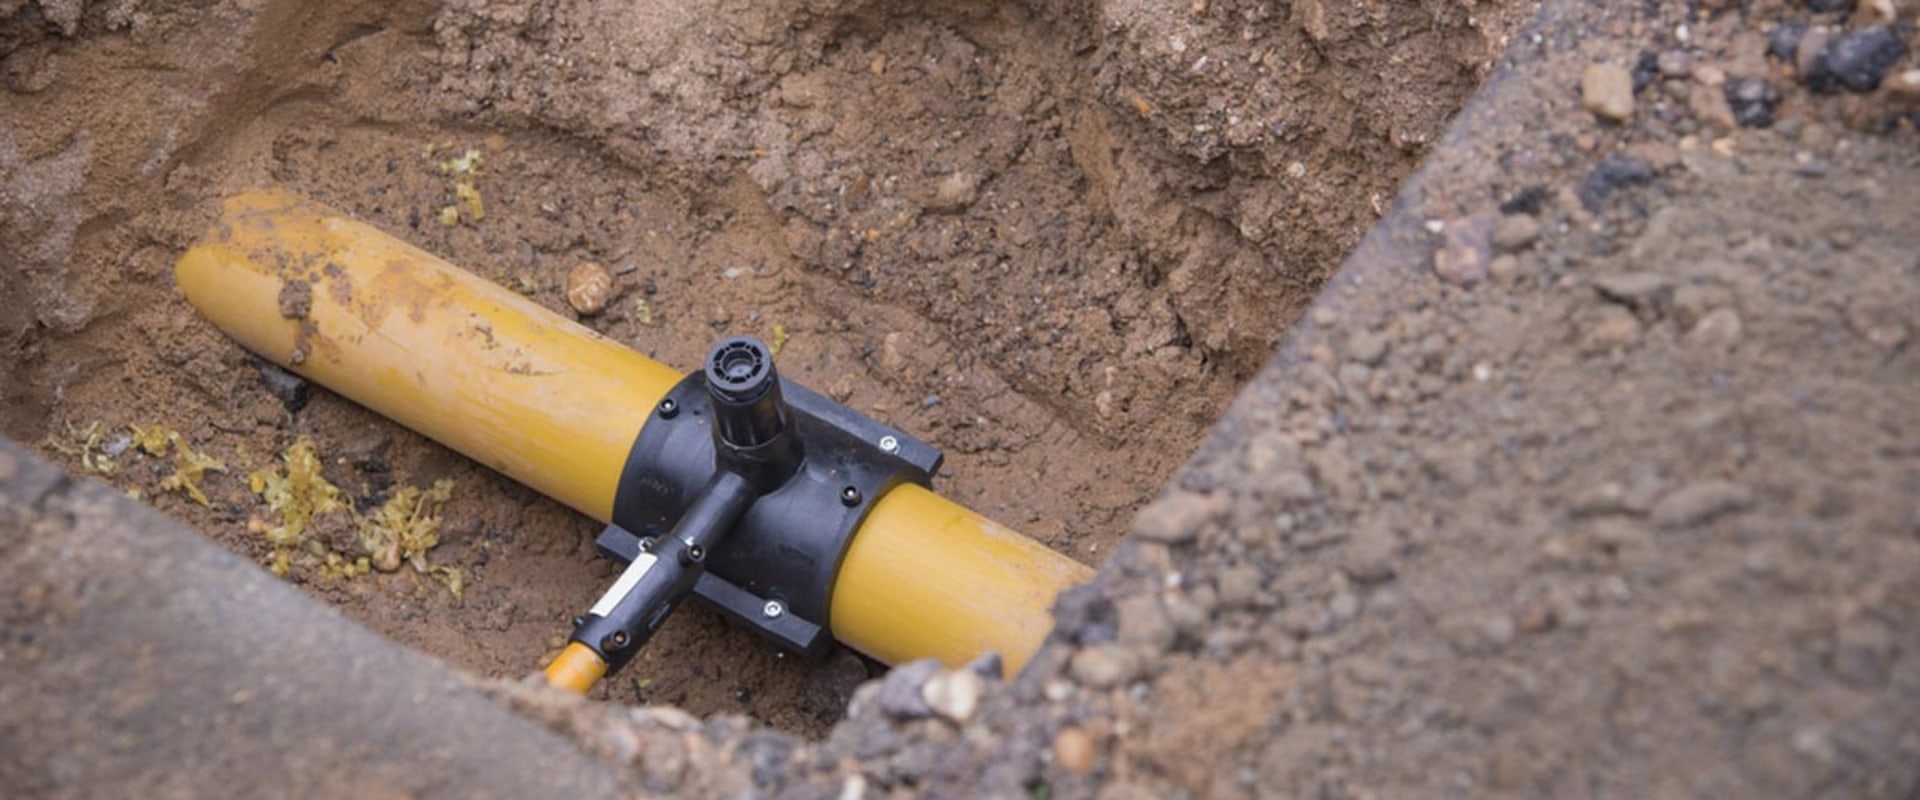 Are natural gas lines metal or plastic?